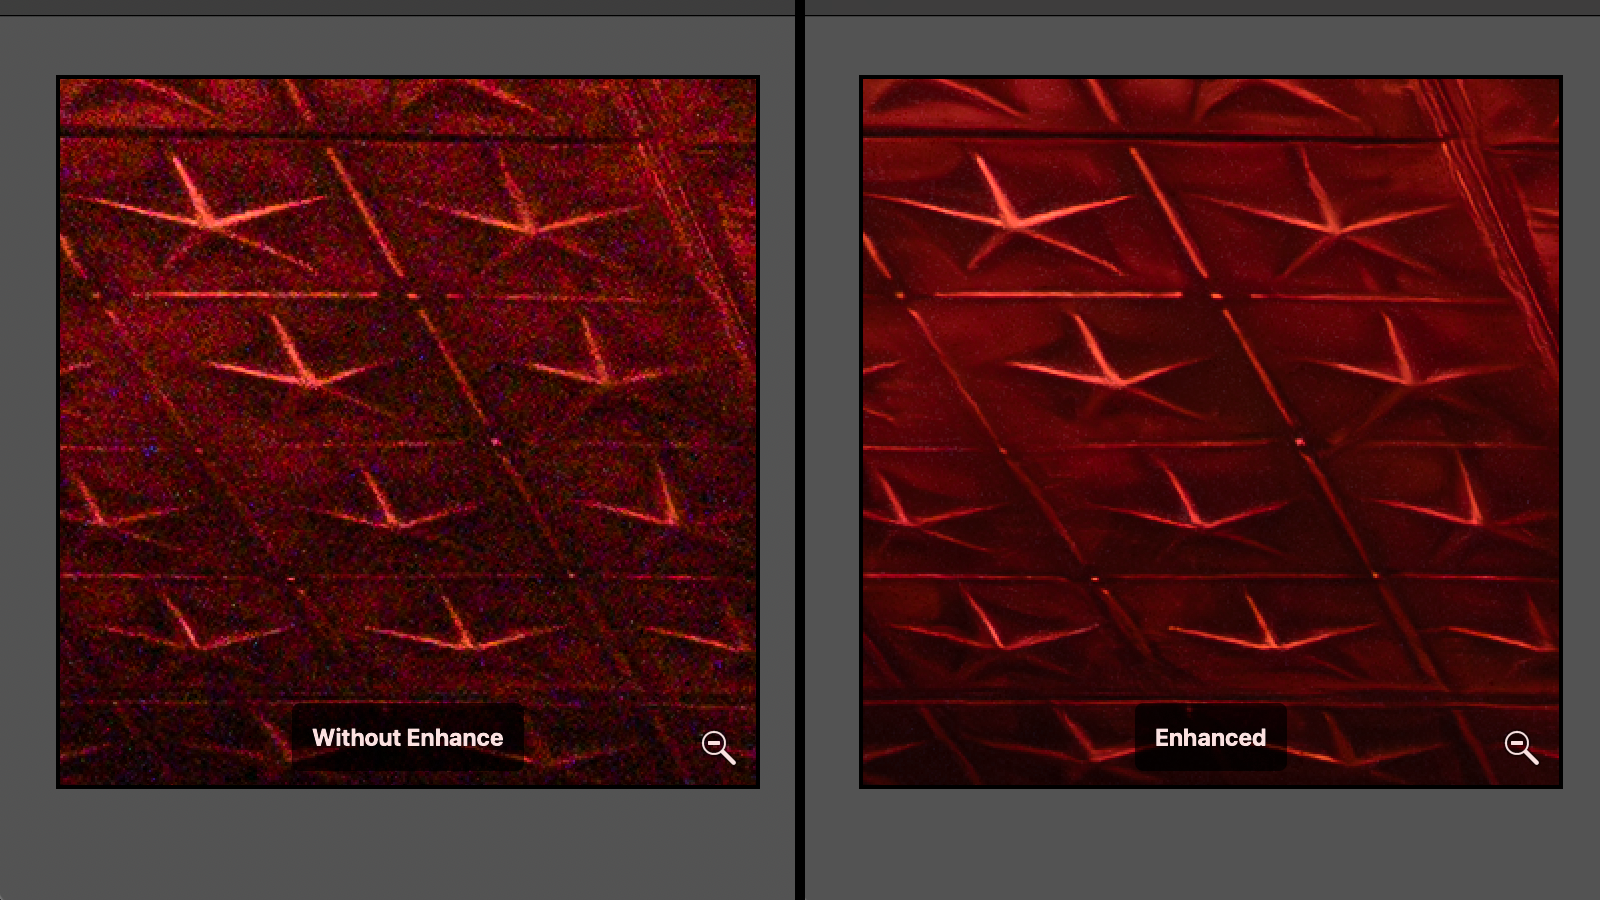 Side-by-side comparison showing the effect of the Denoise tool in Adobe Camera Raw